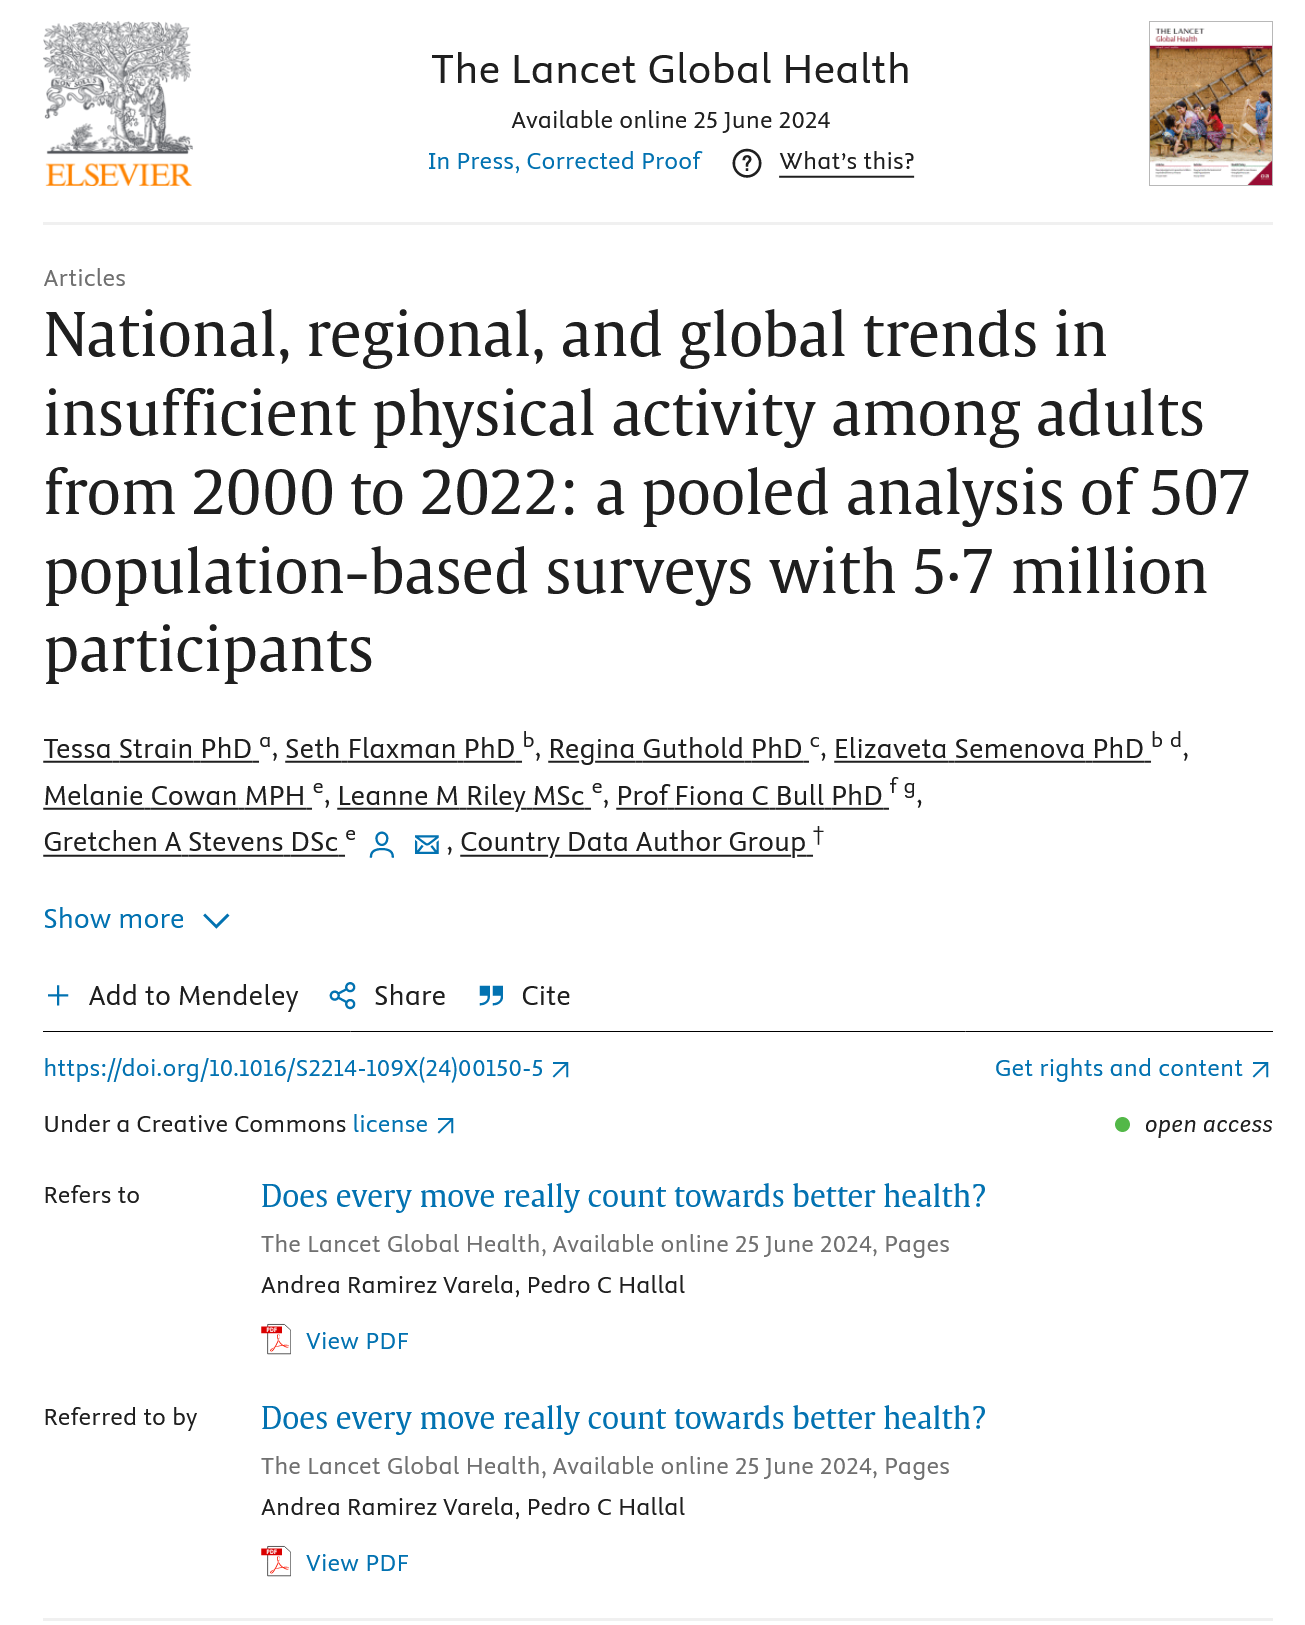 National, regional, and global trends in insufficient physical activity among adults from 2000 to 2022: a pooled analysis of 507 population-based surveys with 5·7 million participants